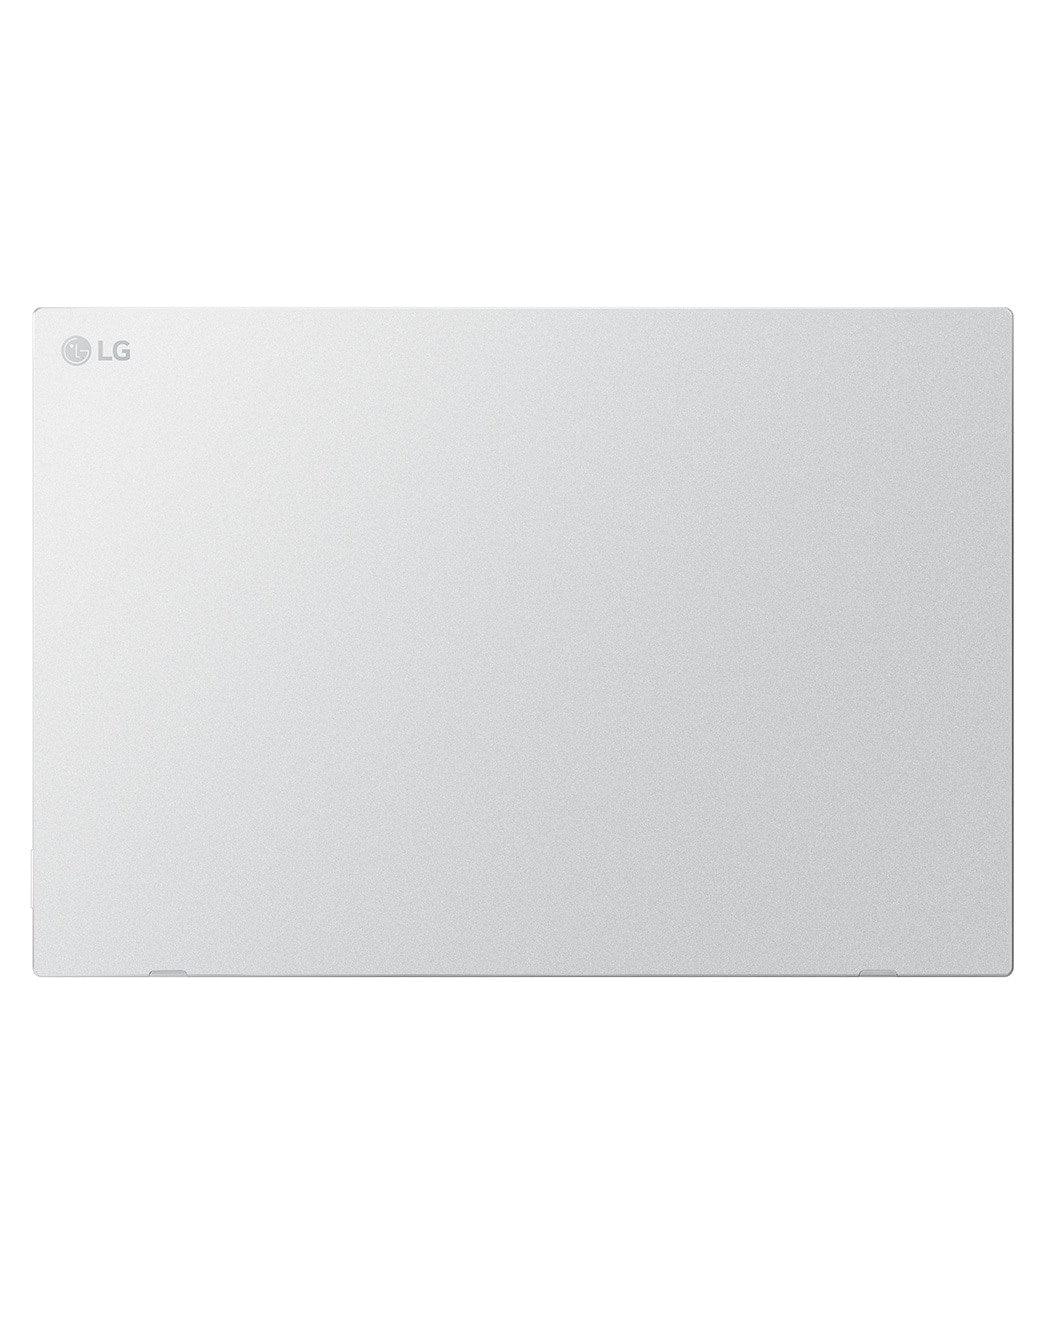 LG +view for LG gram 16" Portable Monitor, USB Type-C - Marknet Technology